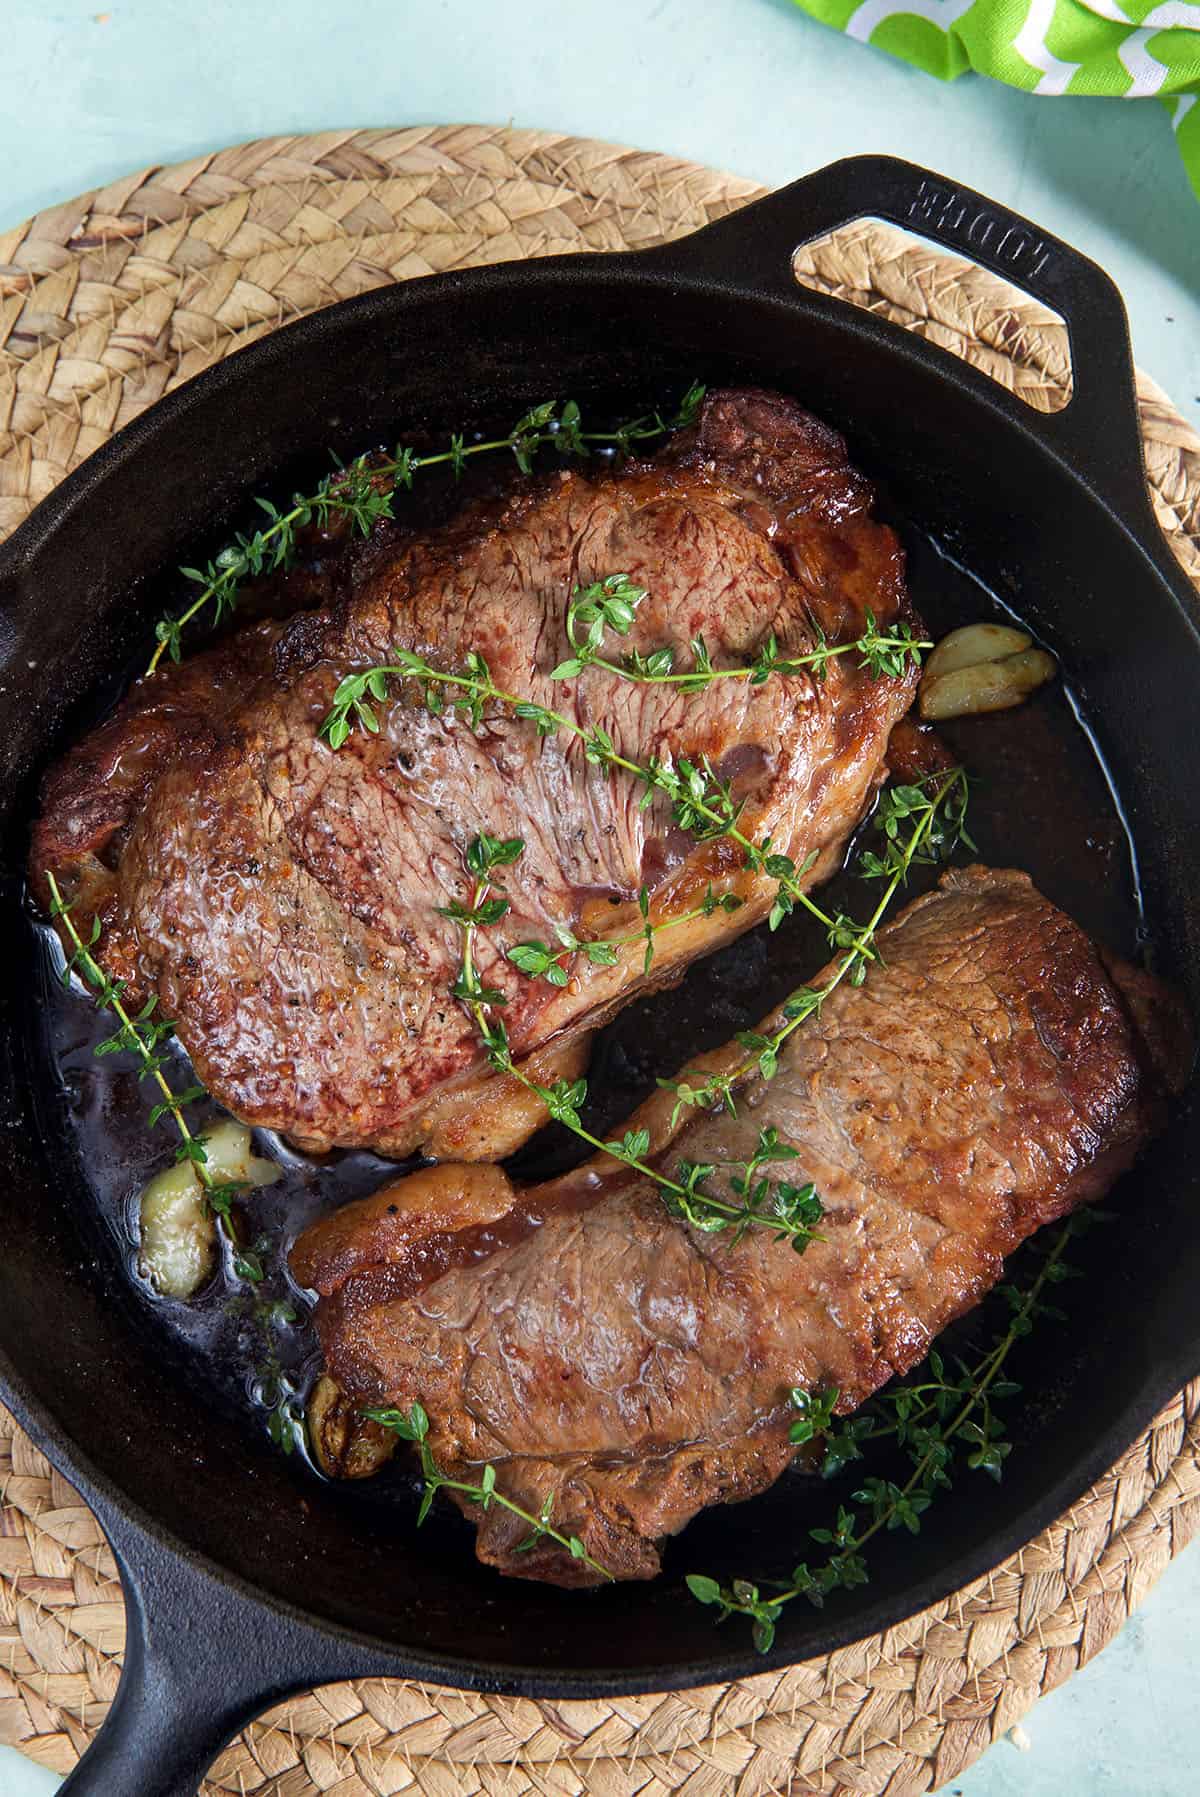 Two steaks are cooked with herbs and butter in a black cast iron skillet.